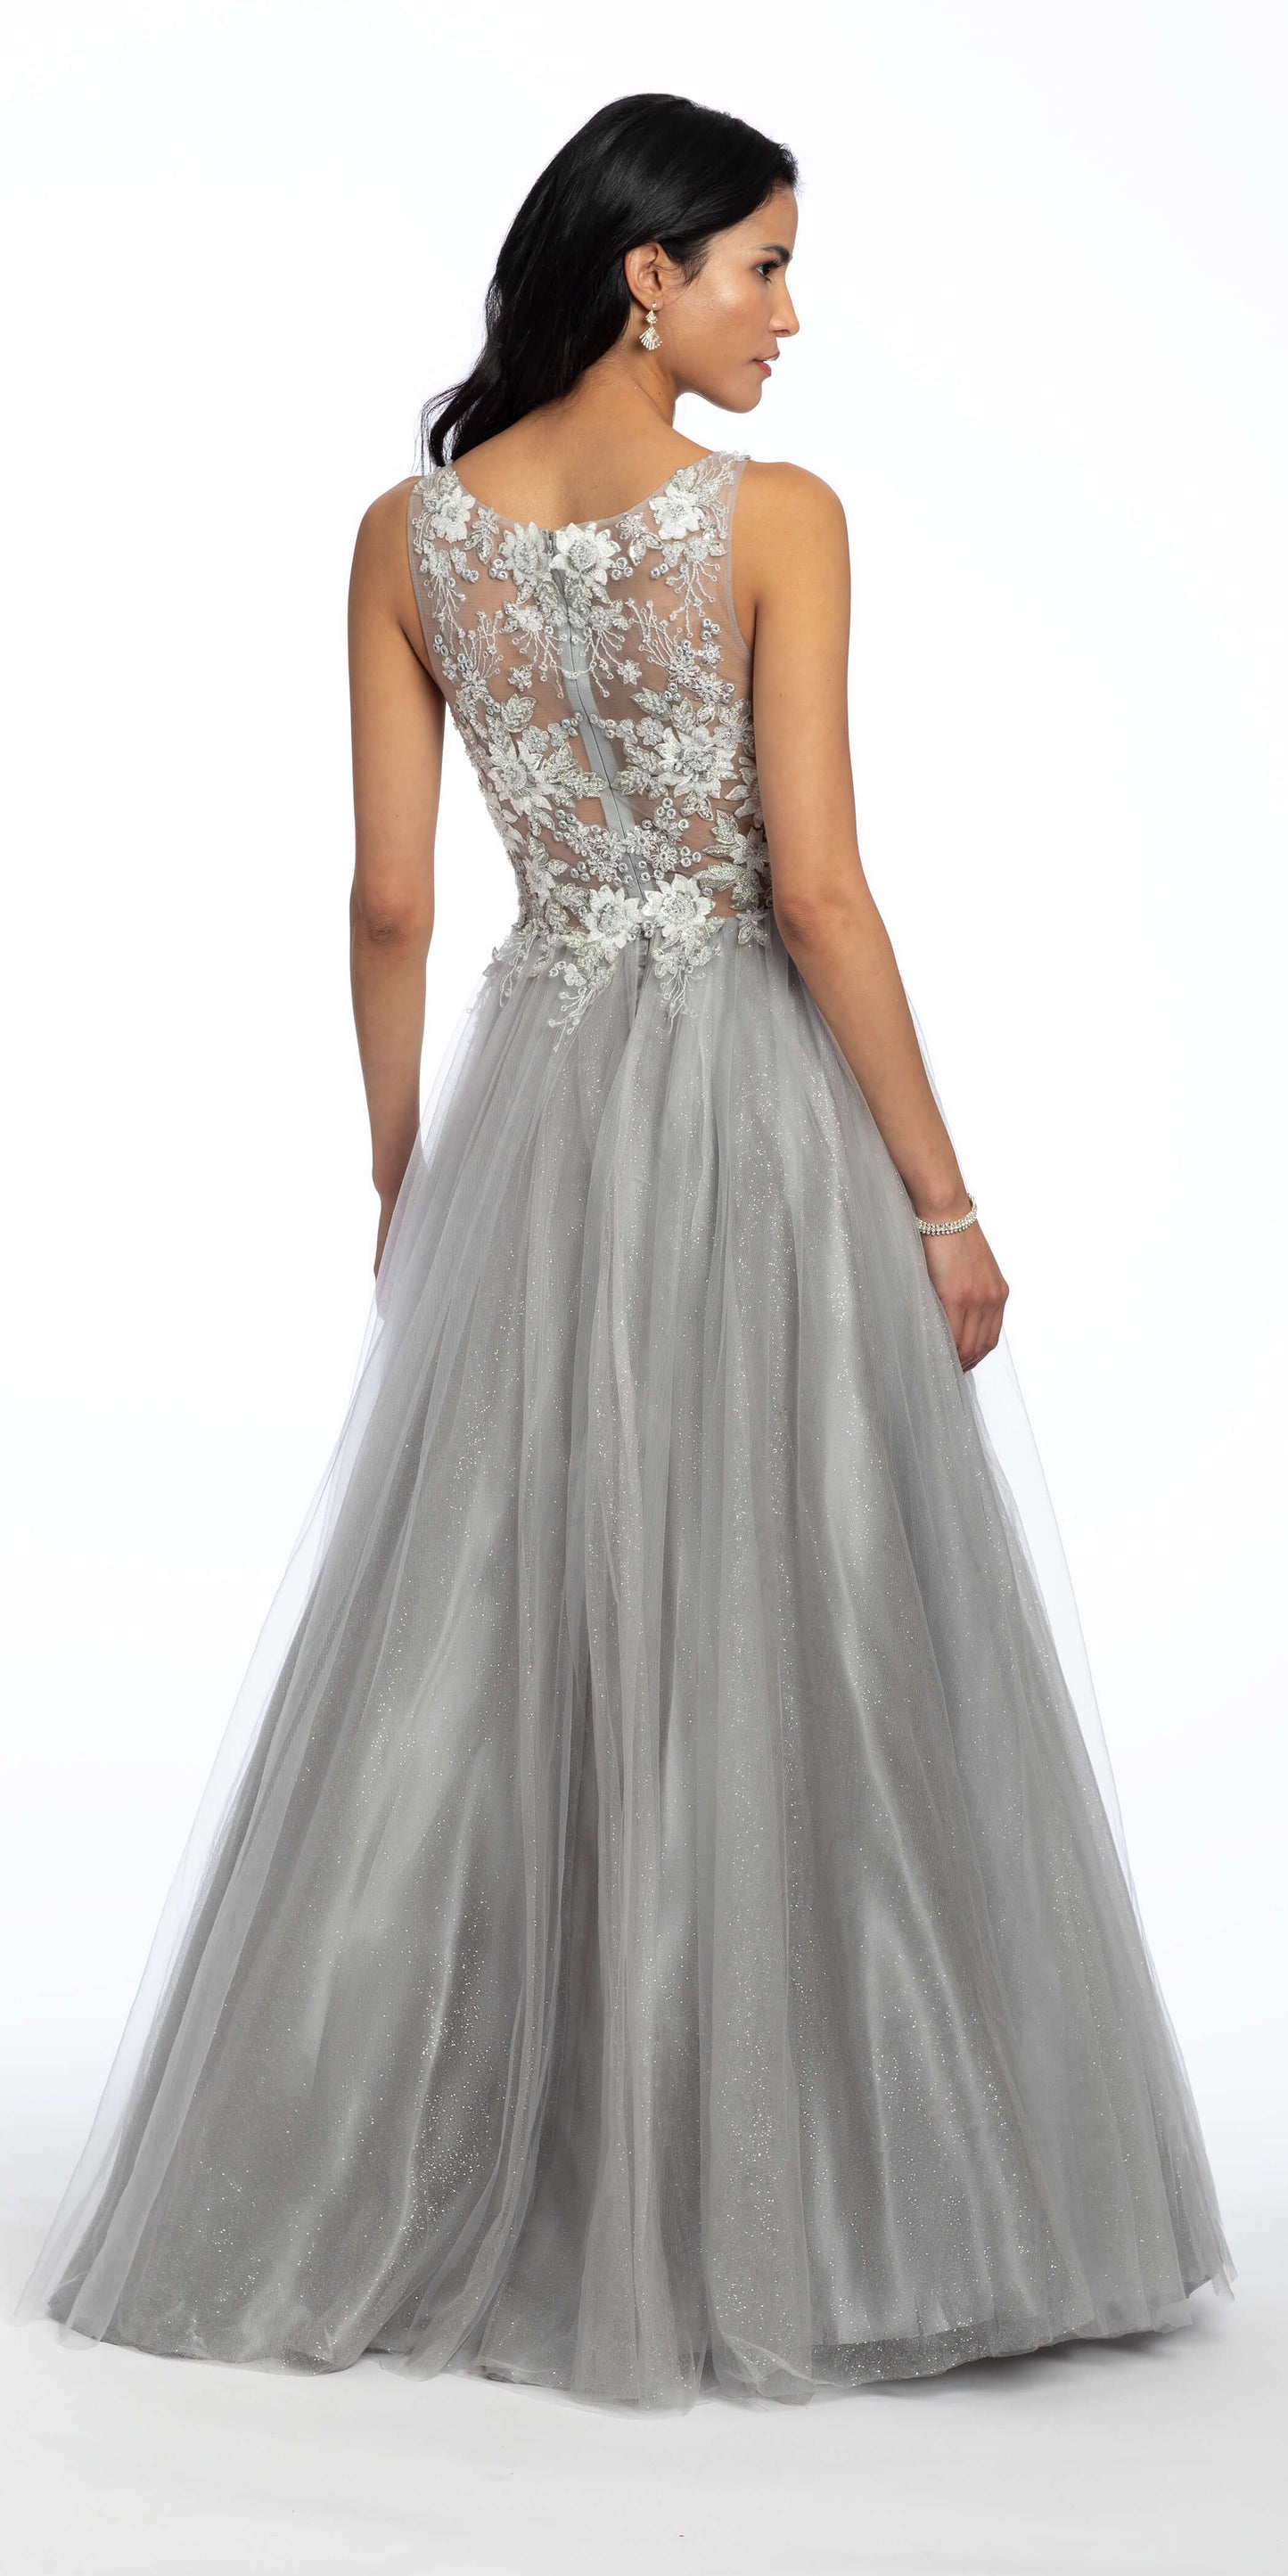 Camille La Vie Plunging Beaded Embroidered Glitter Mesh Ballgown